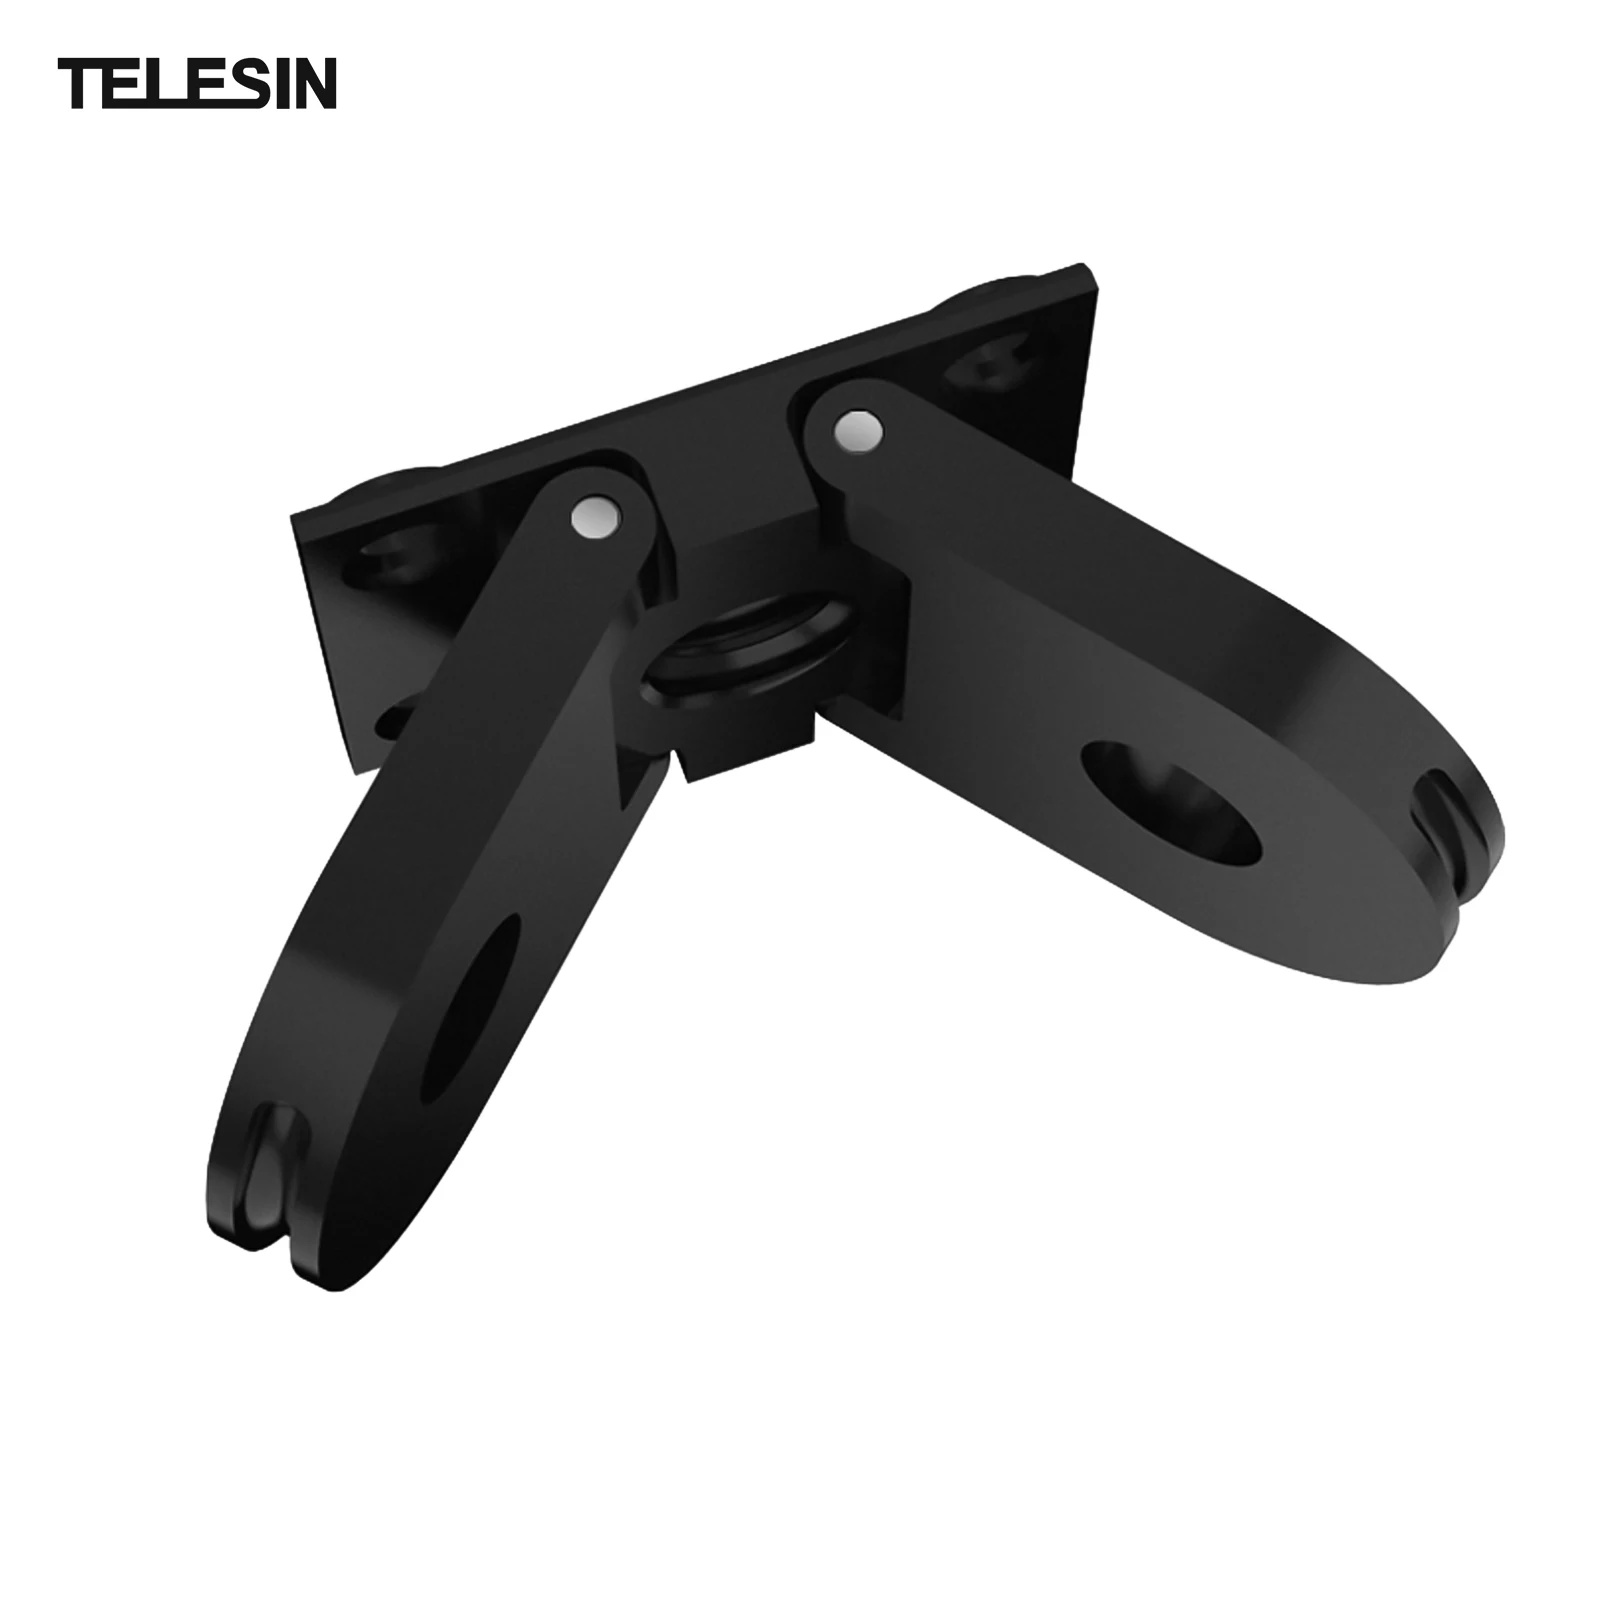 

TELESIN GP-FMS-902 Dual Interface Adapter Mount Camera Tripod Adapter Base 1/4 Inch Screw Hole Replacement for GoPro Hero 9/8